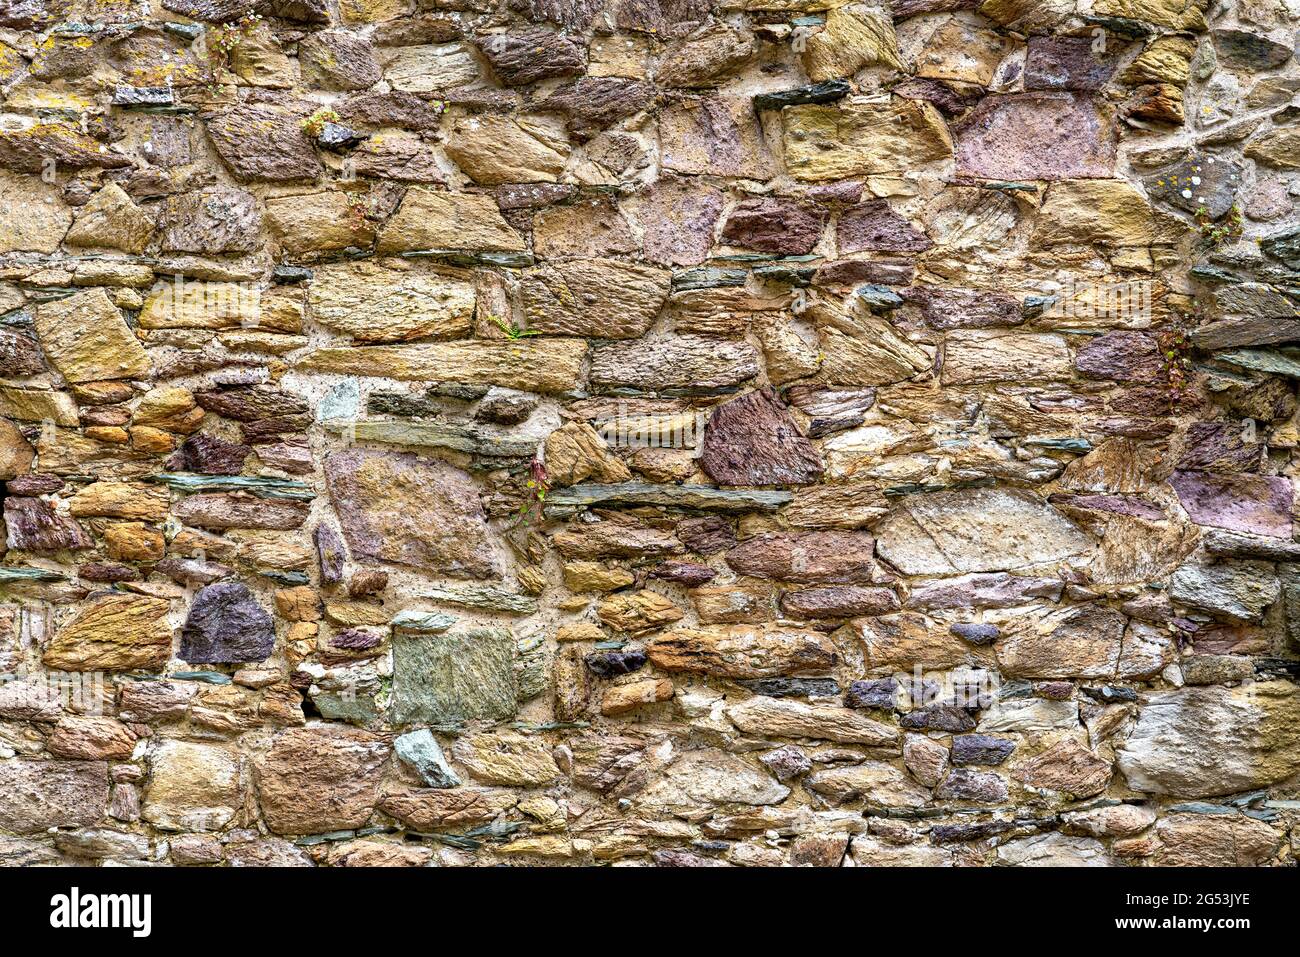 Rubble wall constructed from purple and yellow sandstones and metamorphic rocks from the St David's peninsula in Pembrokeshire UK Stock Photo